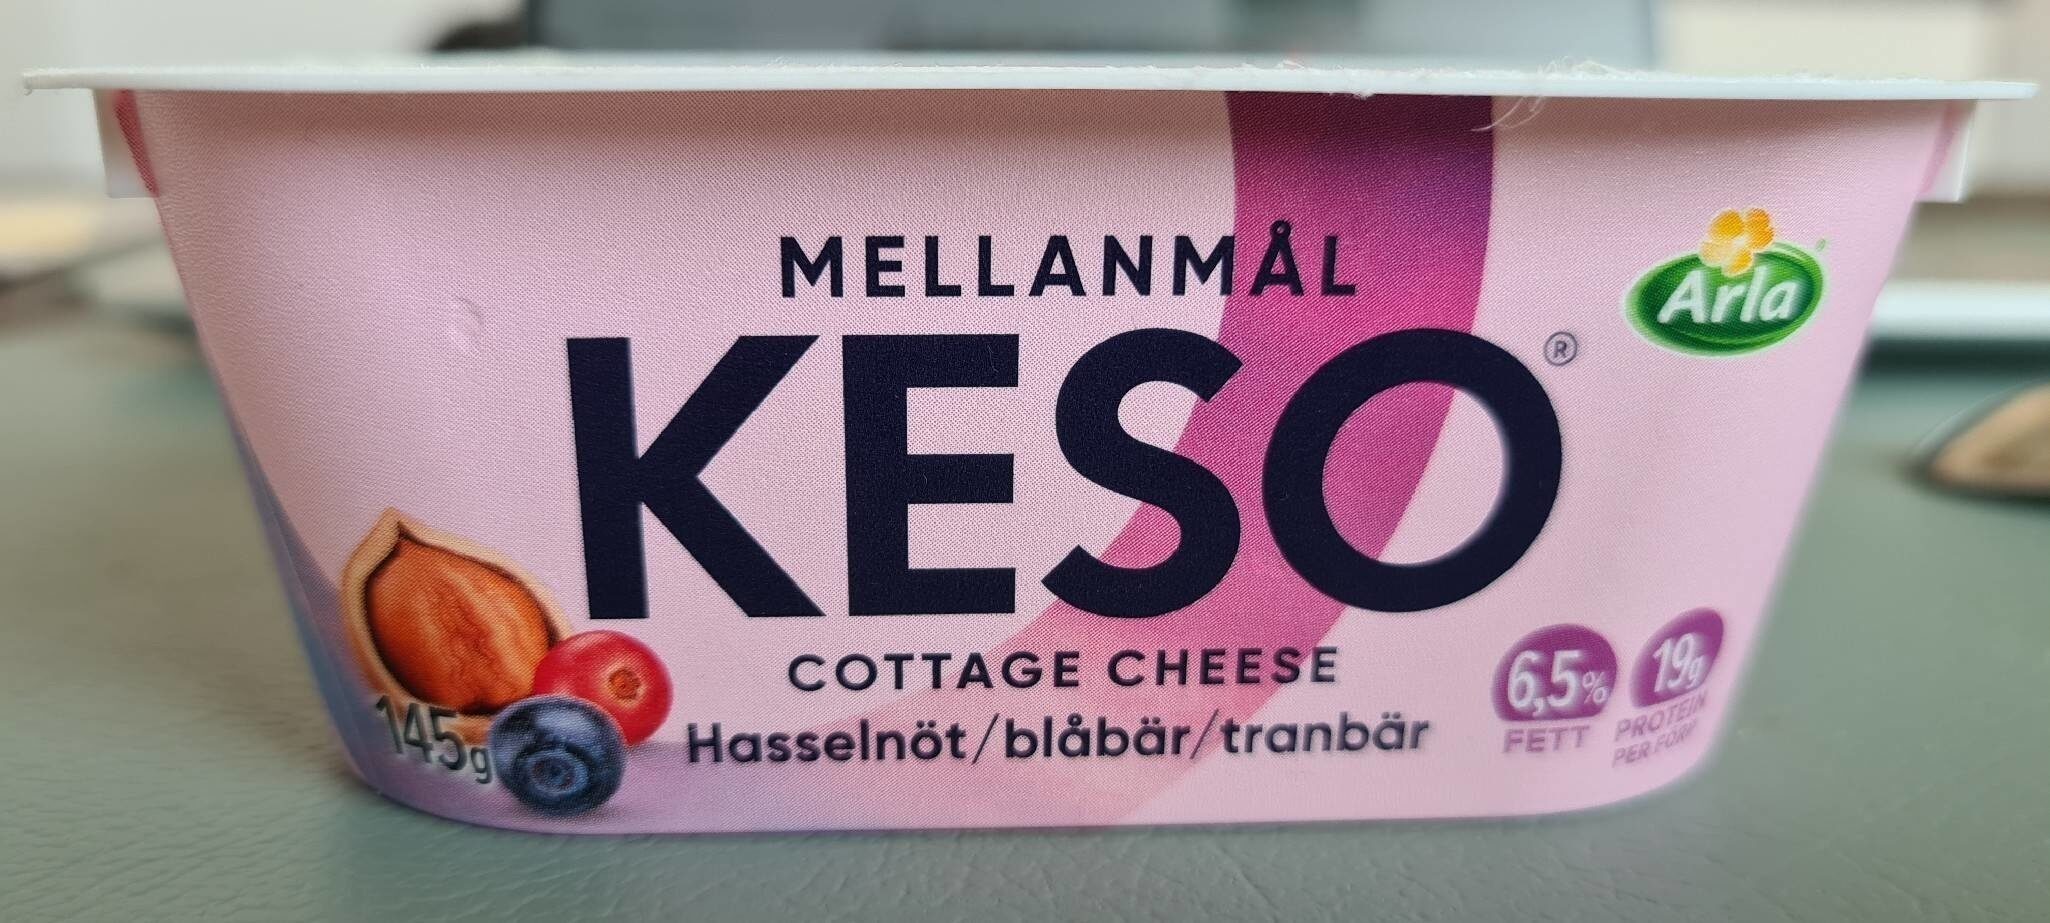 Keso Cottage Cheese - Product